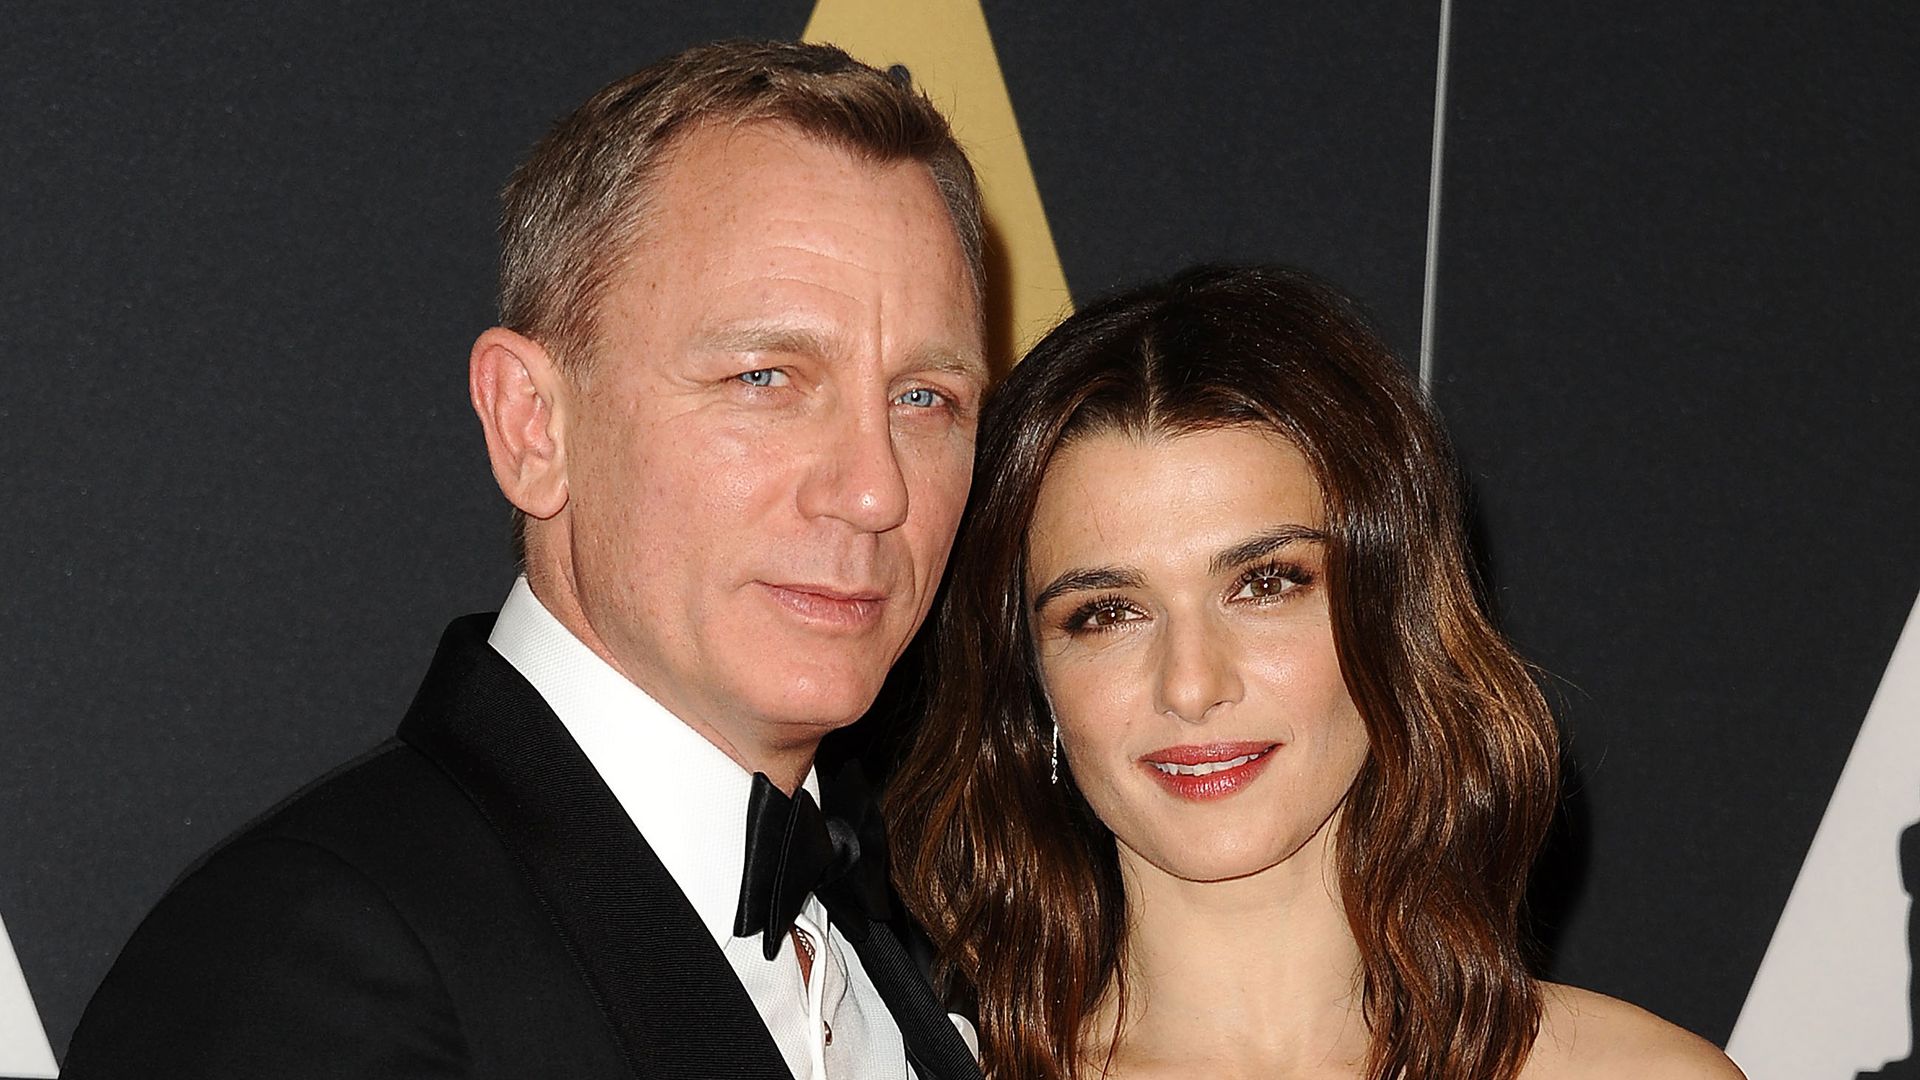 Daniel Craig and actress Rachel Weisz attend the 7th annual Governors Awards